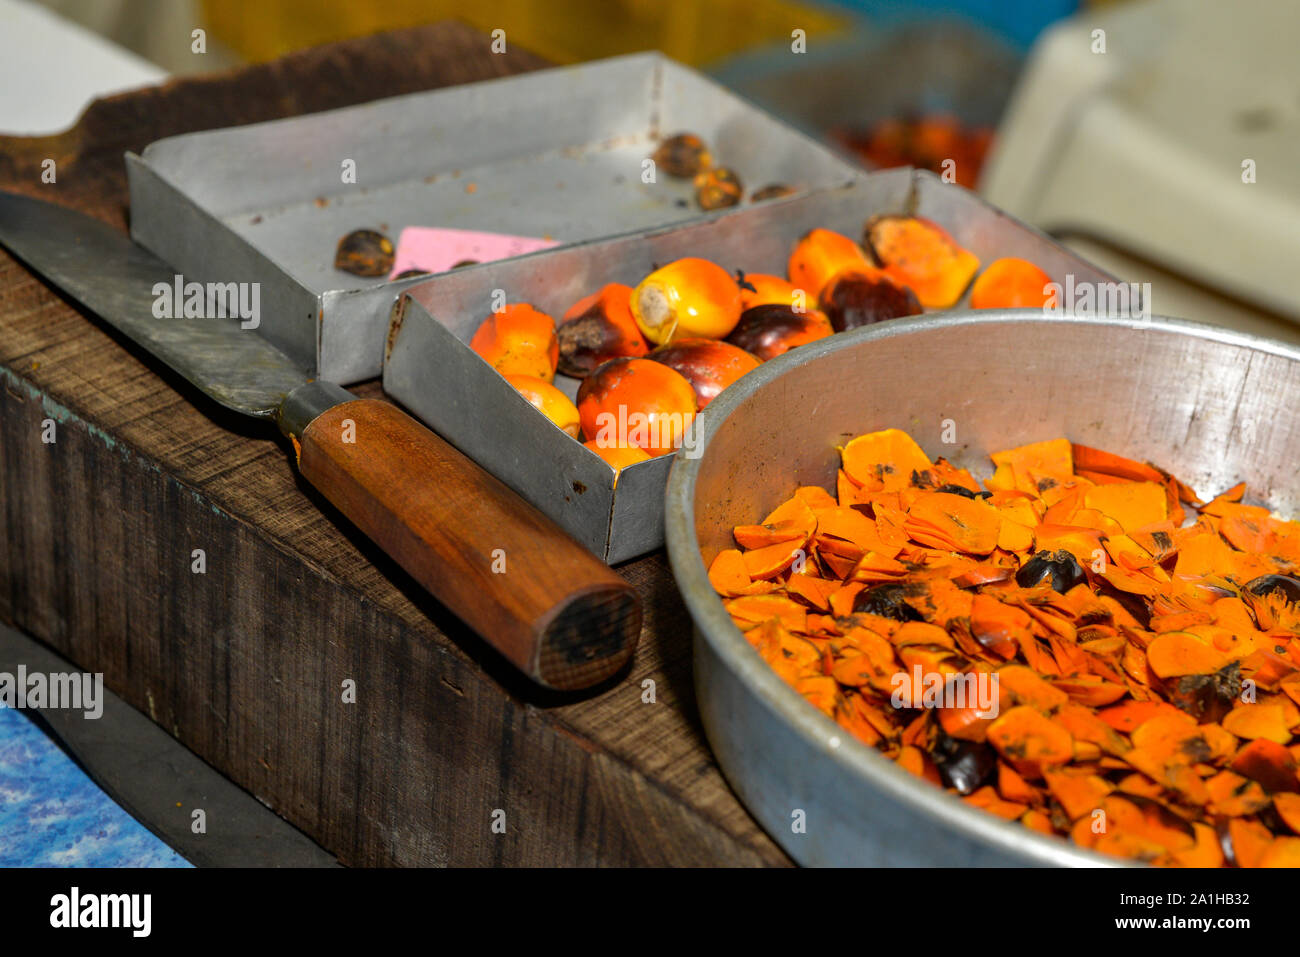 the process and the tools of bunch analysis lab for oil palm industry. Stock Photo